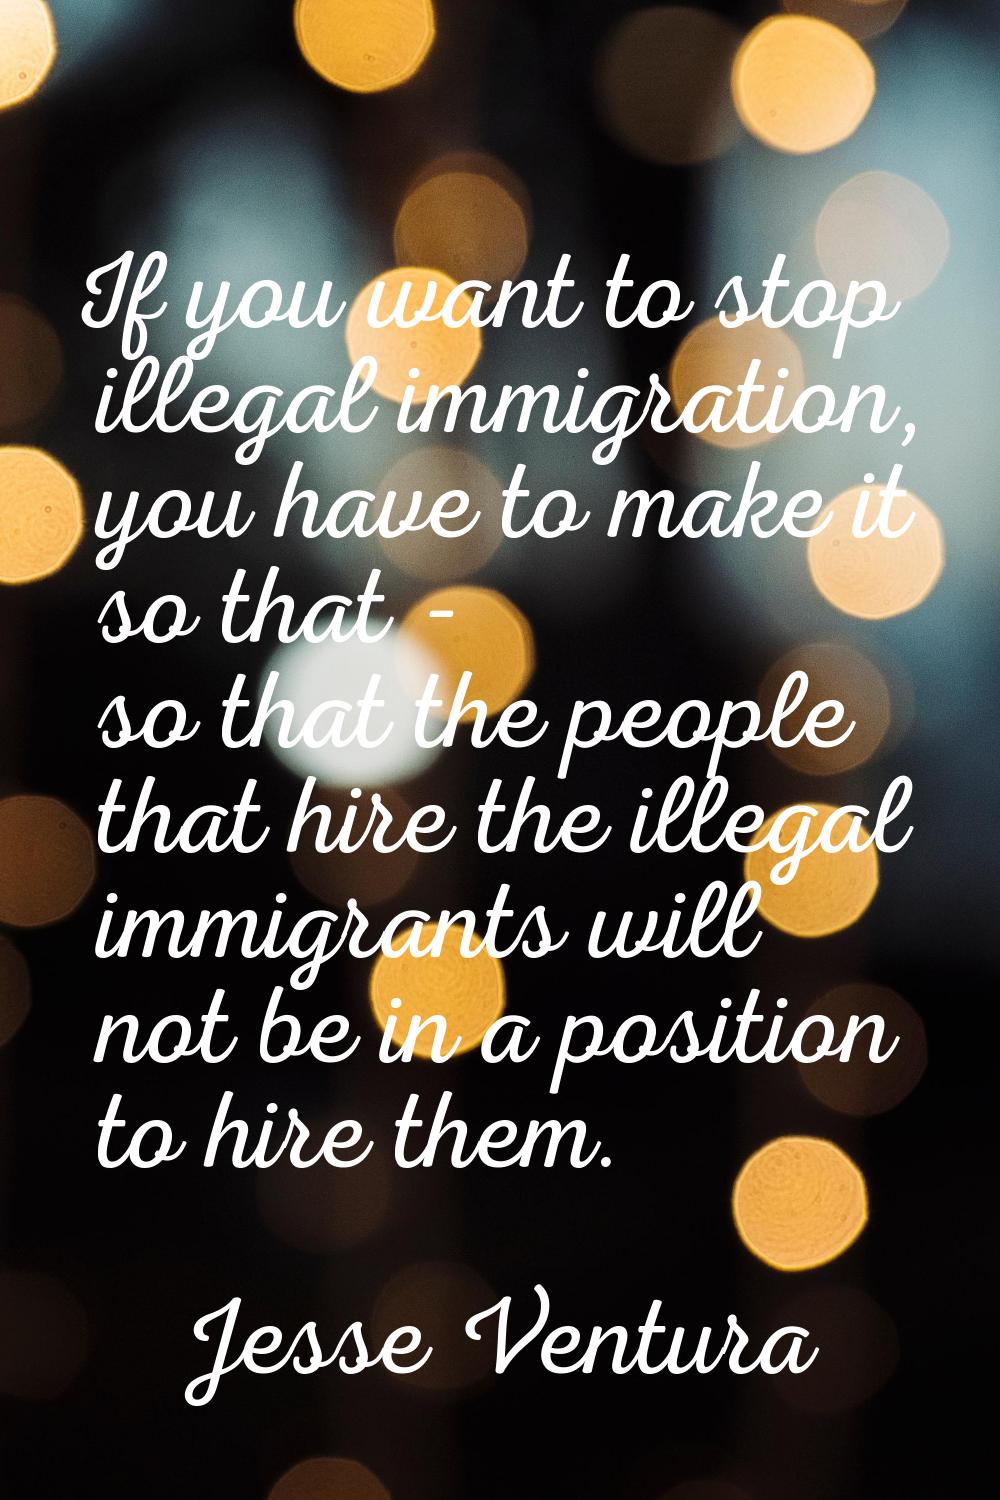 If you want to stop illegal immigration, you have to make it so that - so that the people that hire